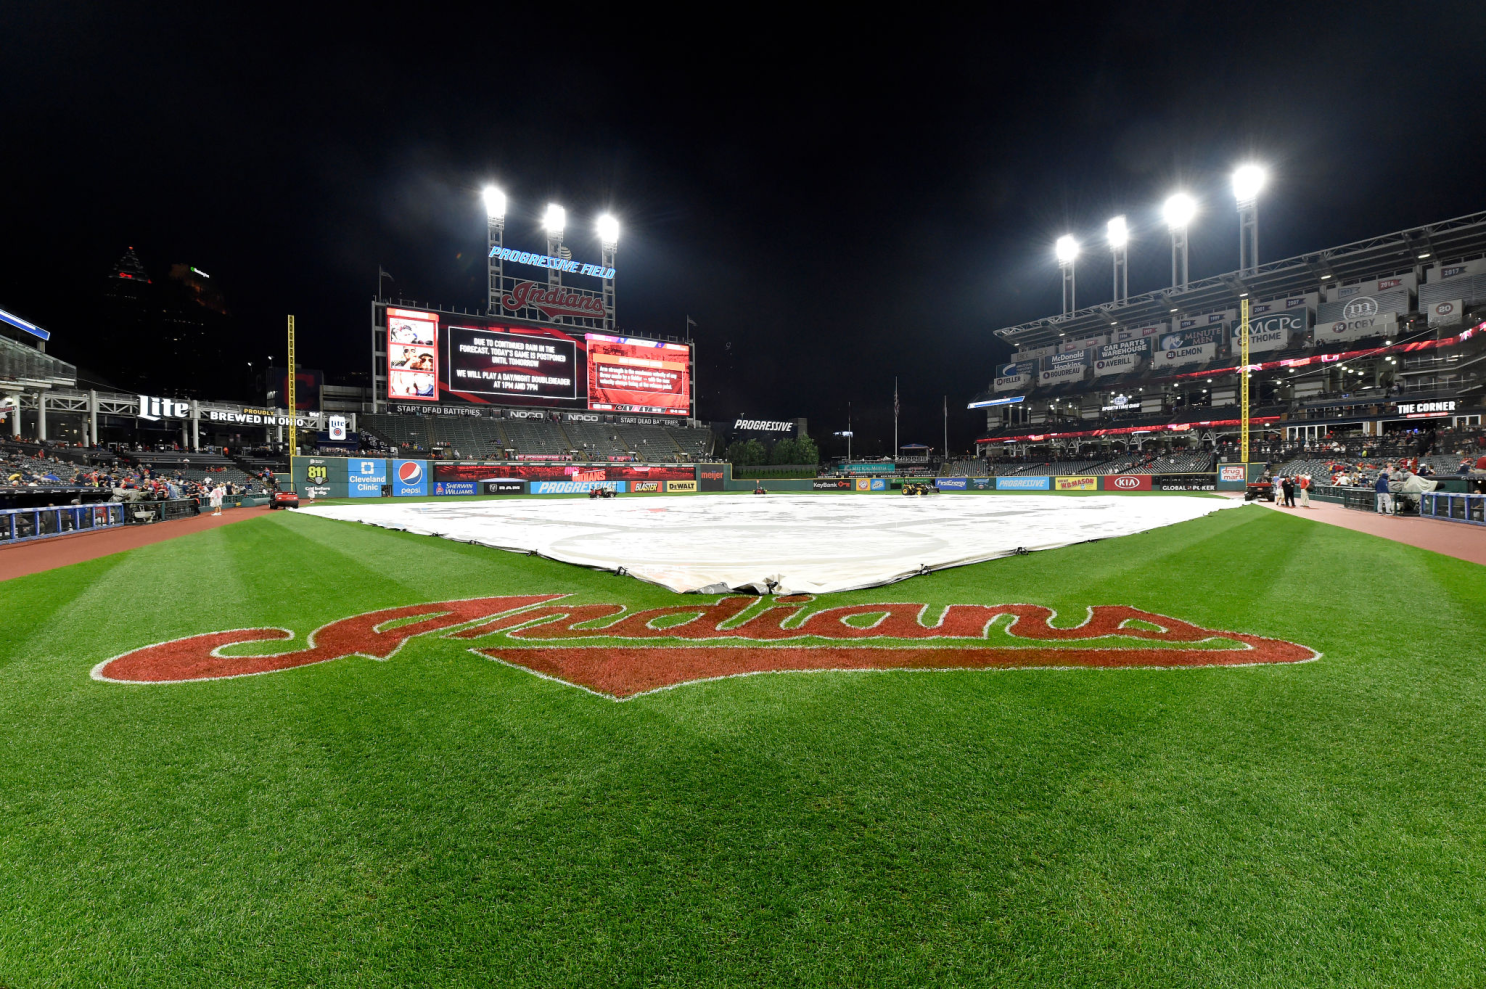 Cleveland Indians look into changing name amid pressure